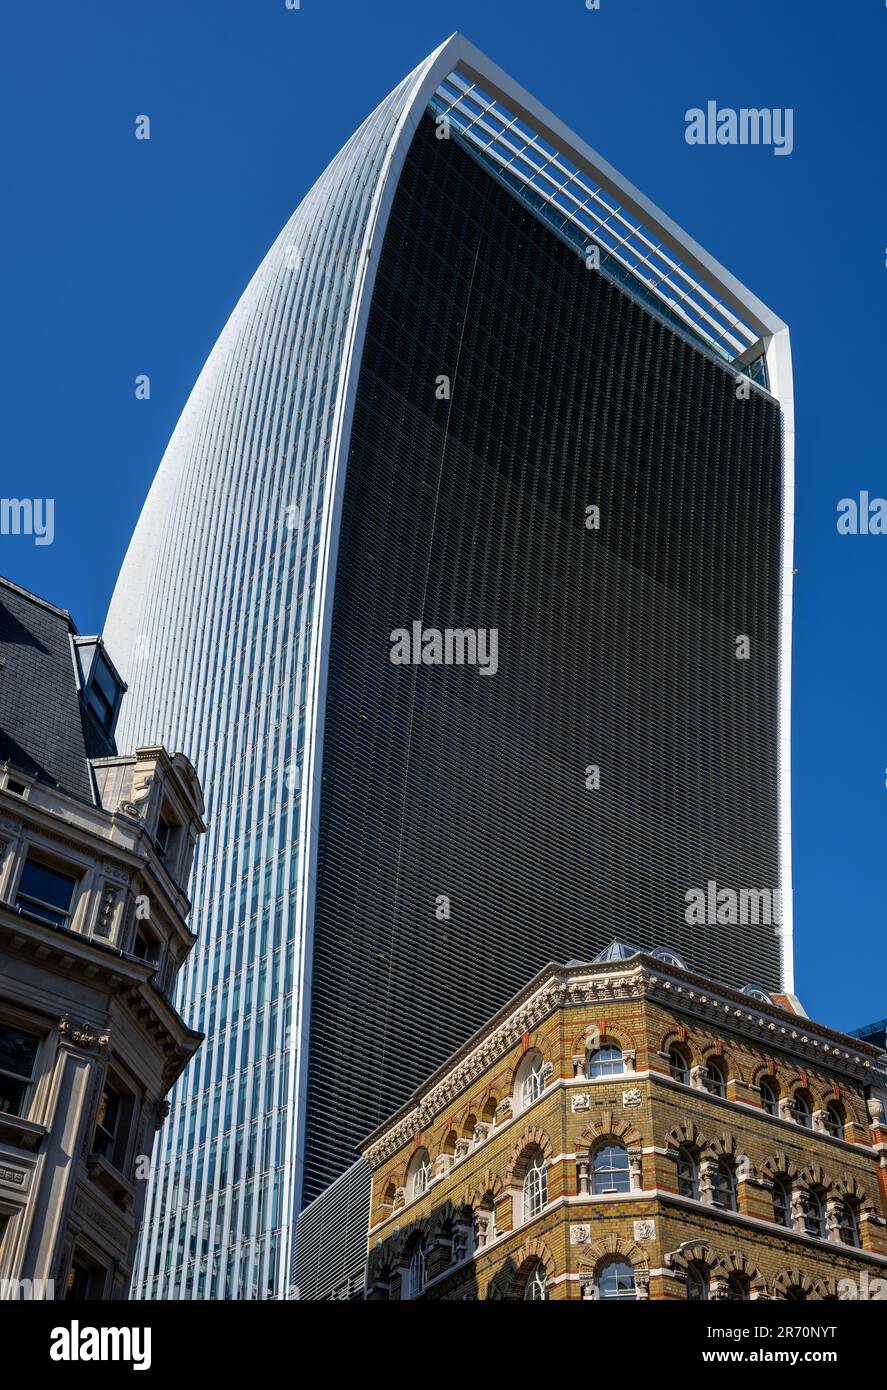 London, UK: The Walkie-Talkie or Fenchurch Building at 20 Fenchurch Street towers over the older buildings below. Seen from Eastcheap. Stock Photo